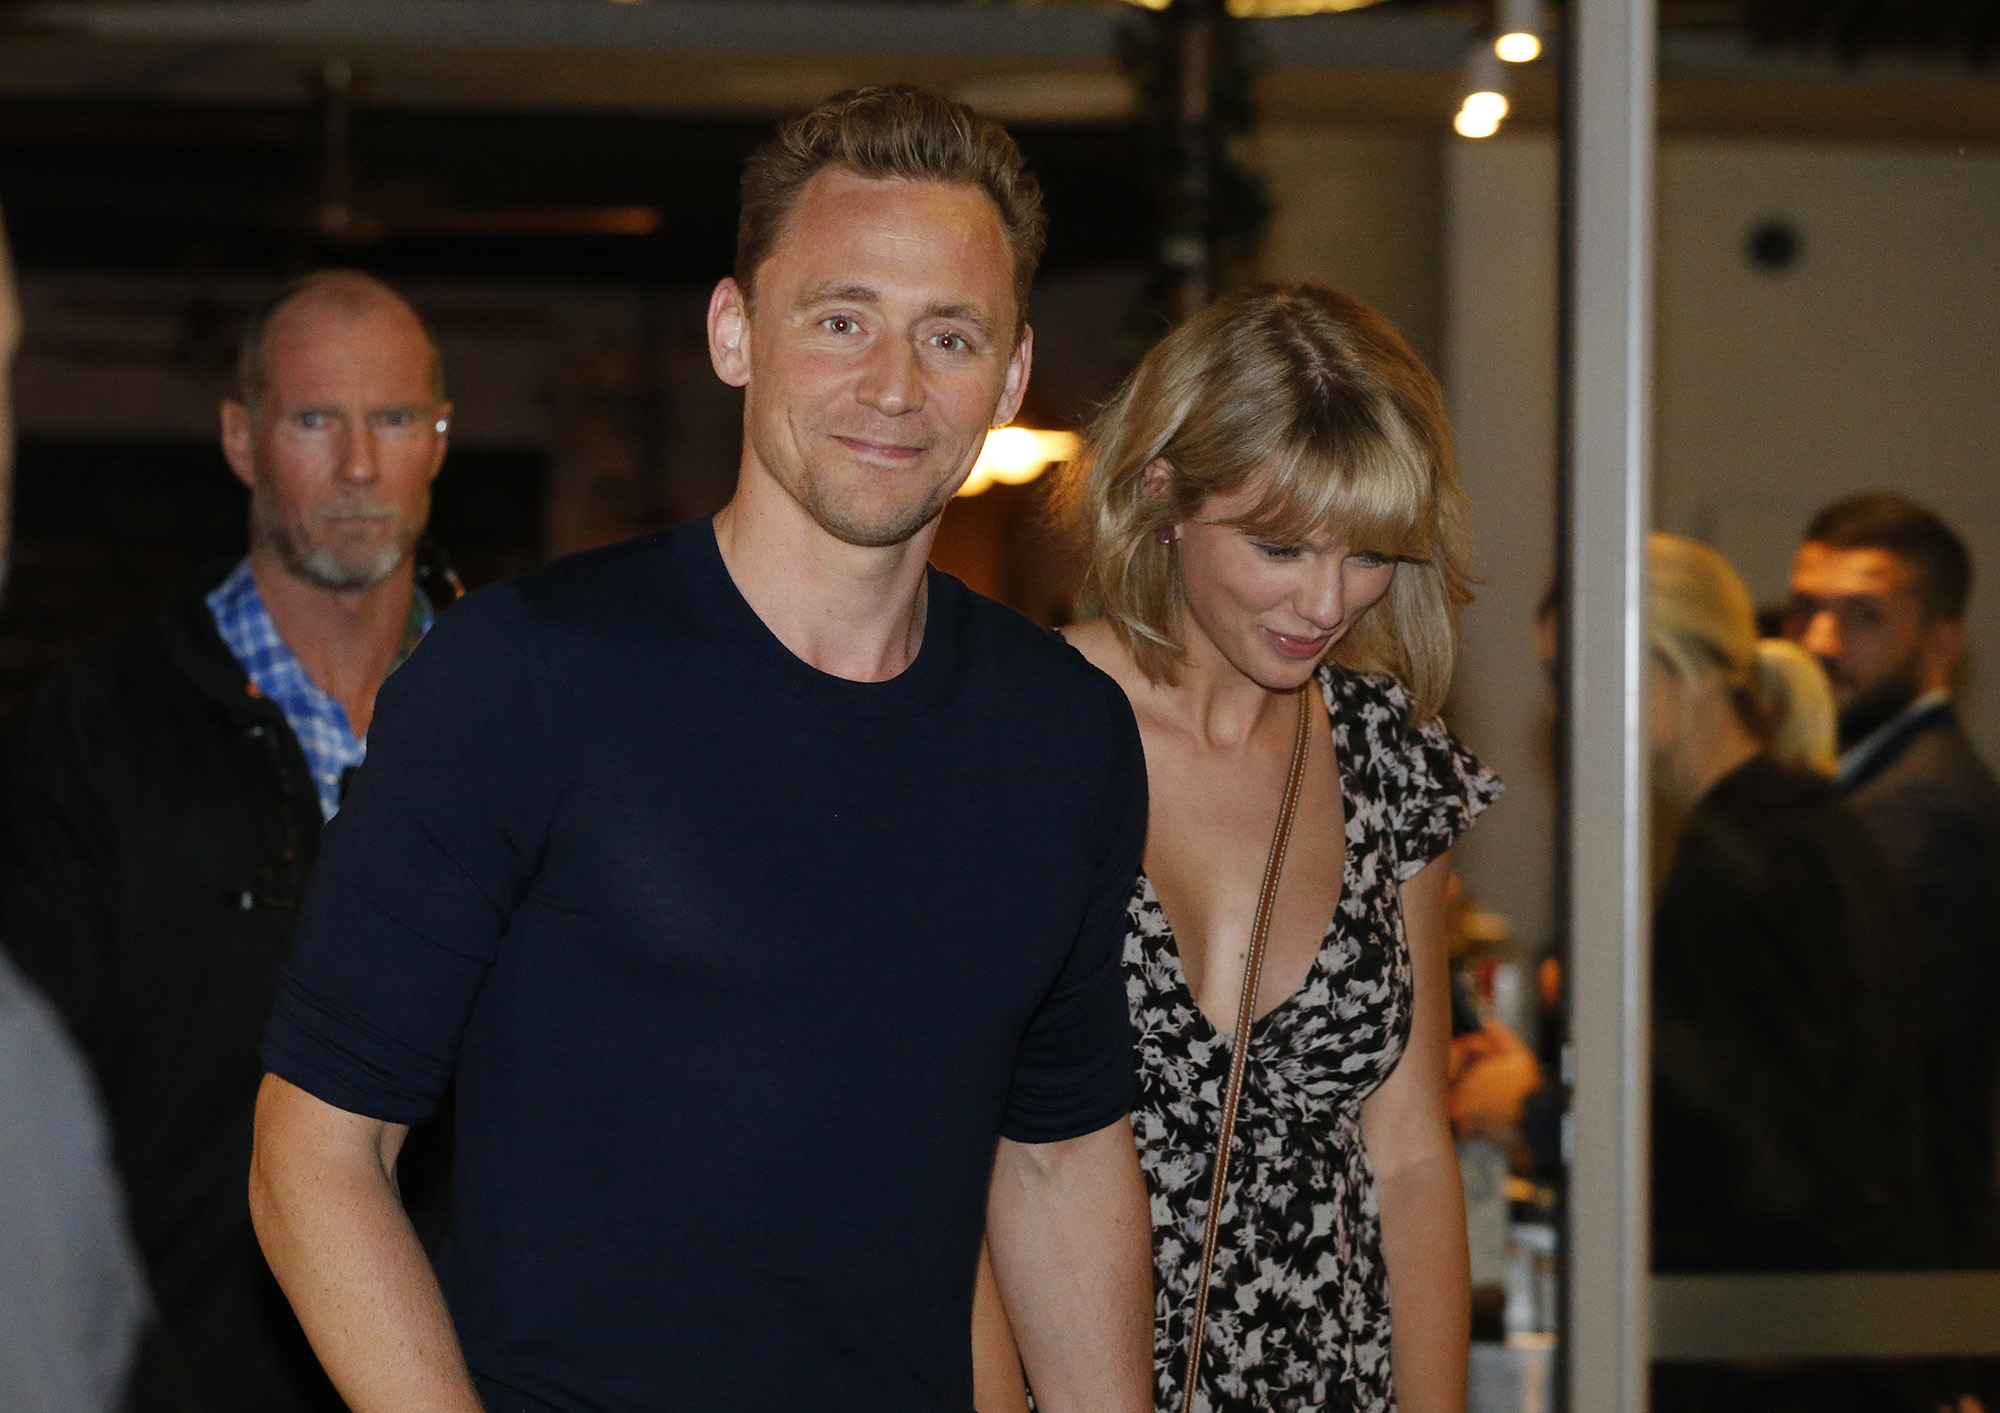 Tom Hiddleston and Taylor Swift on the Gold Coast in Queensland, Australia on July 10, 2016.